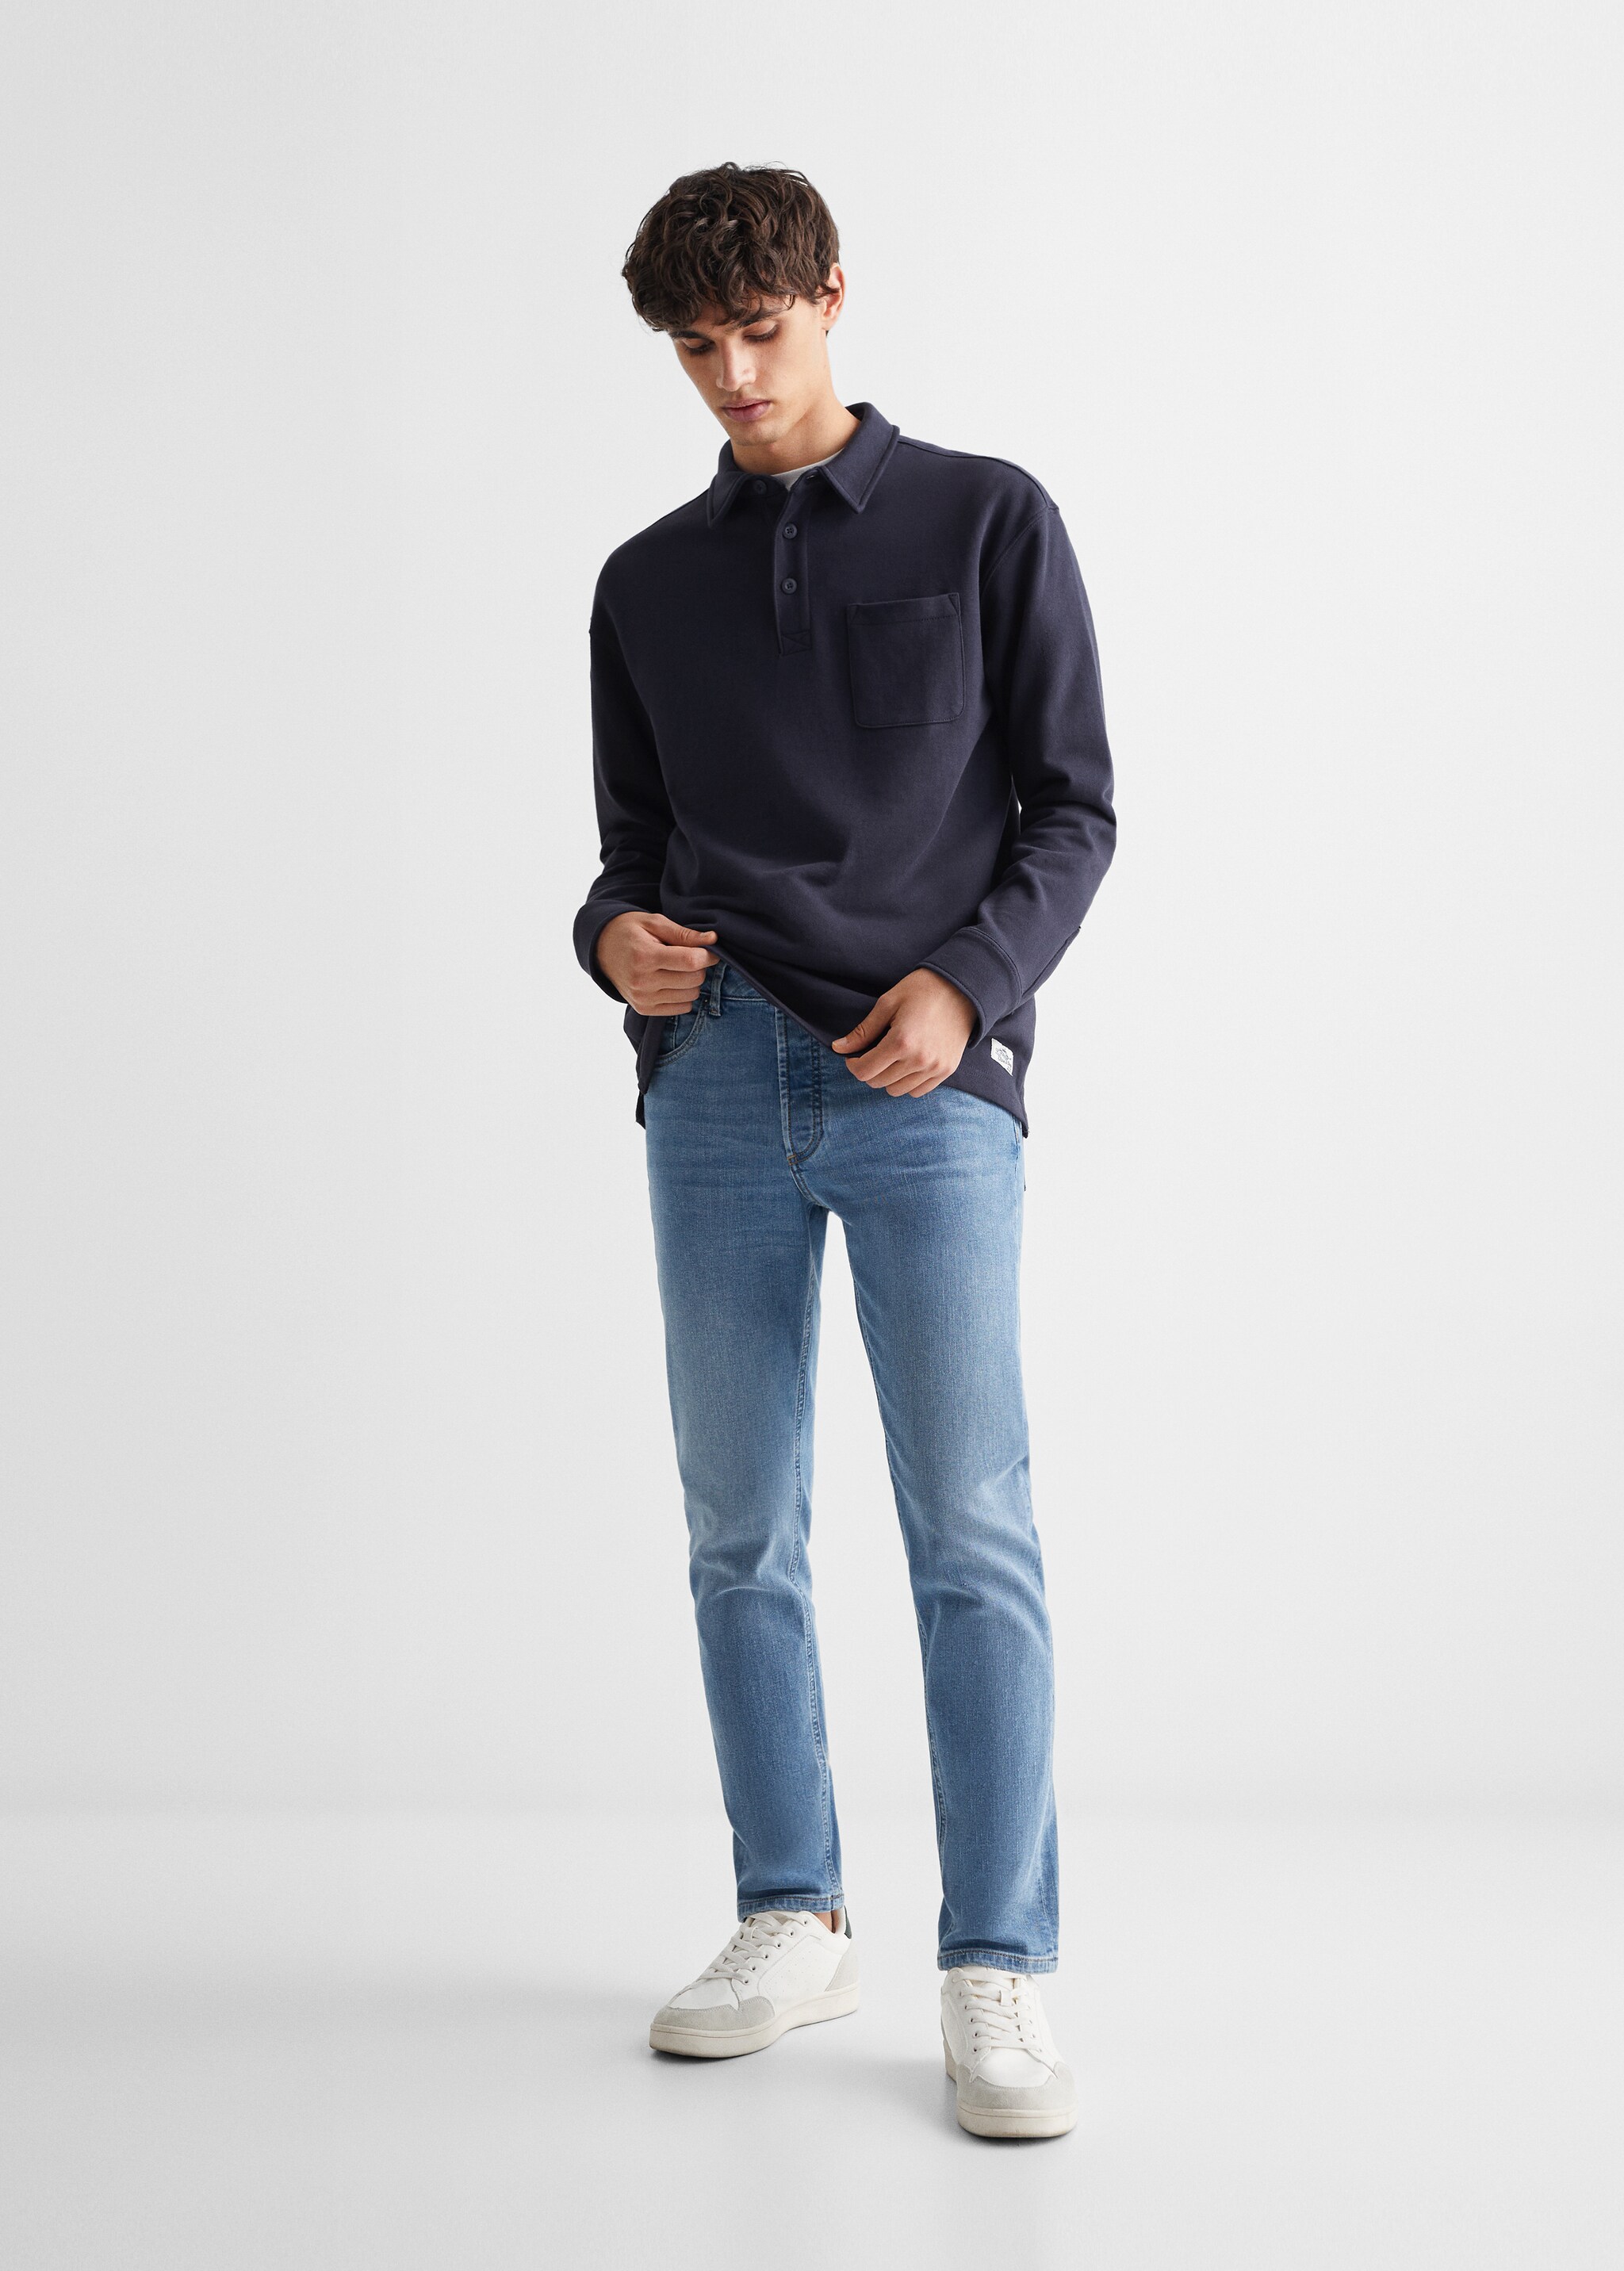 Long sleeves cotton polo - General plane